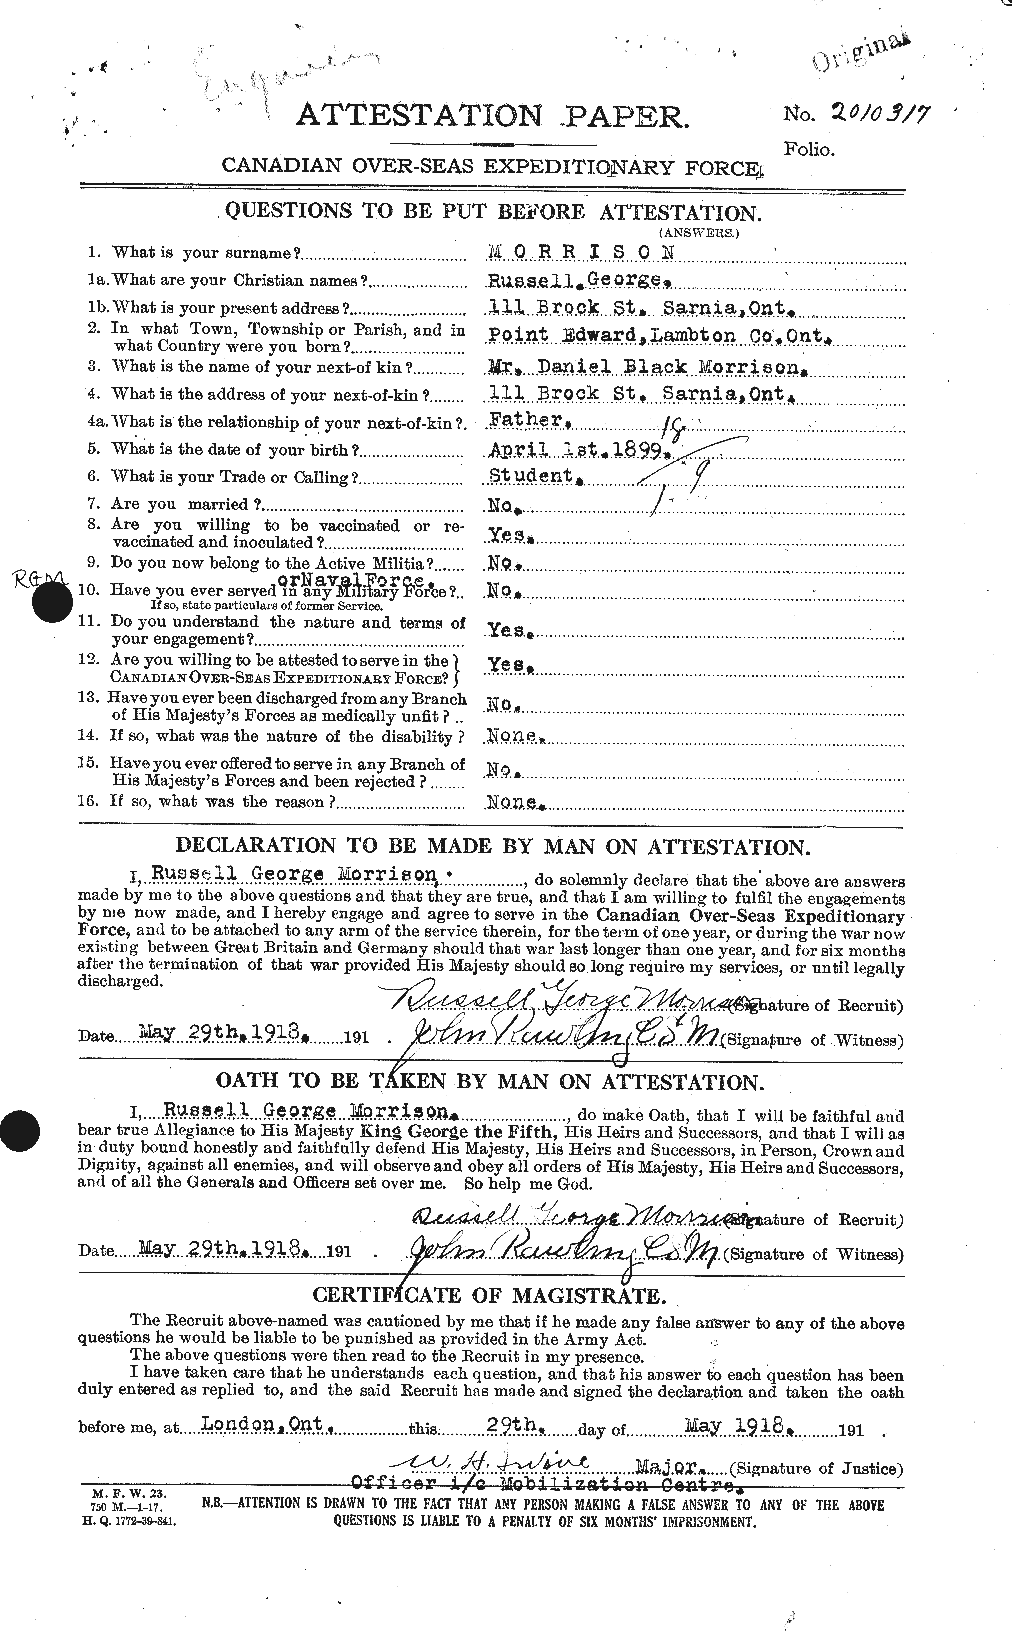 Personnel Records of the First World War - CEF 509137a